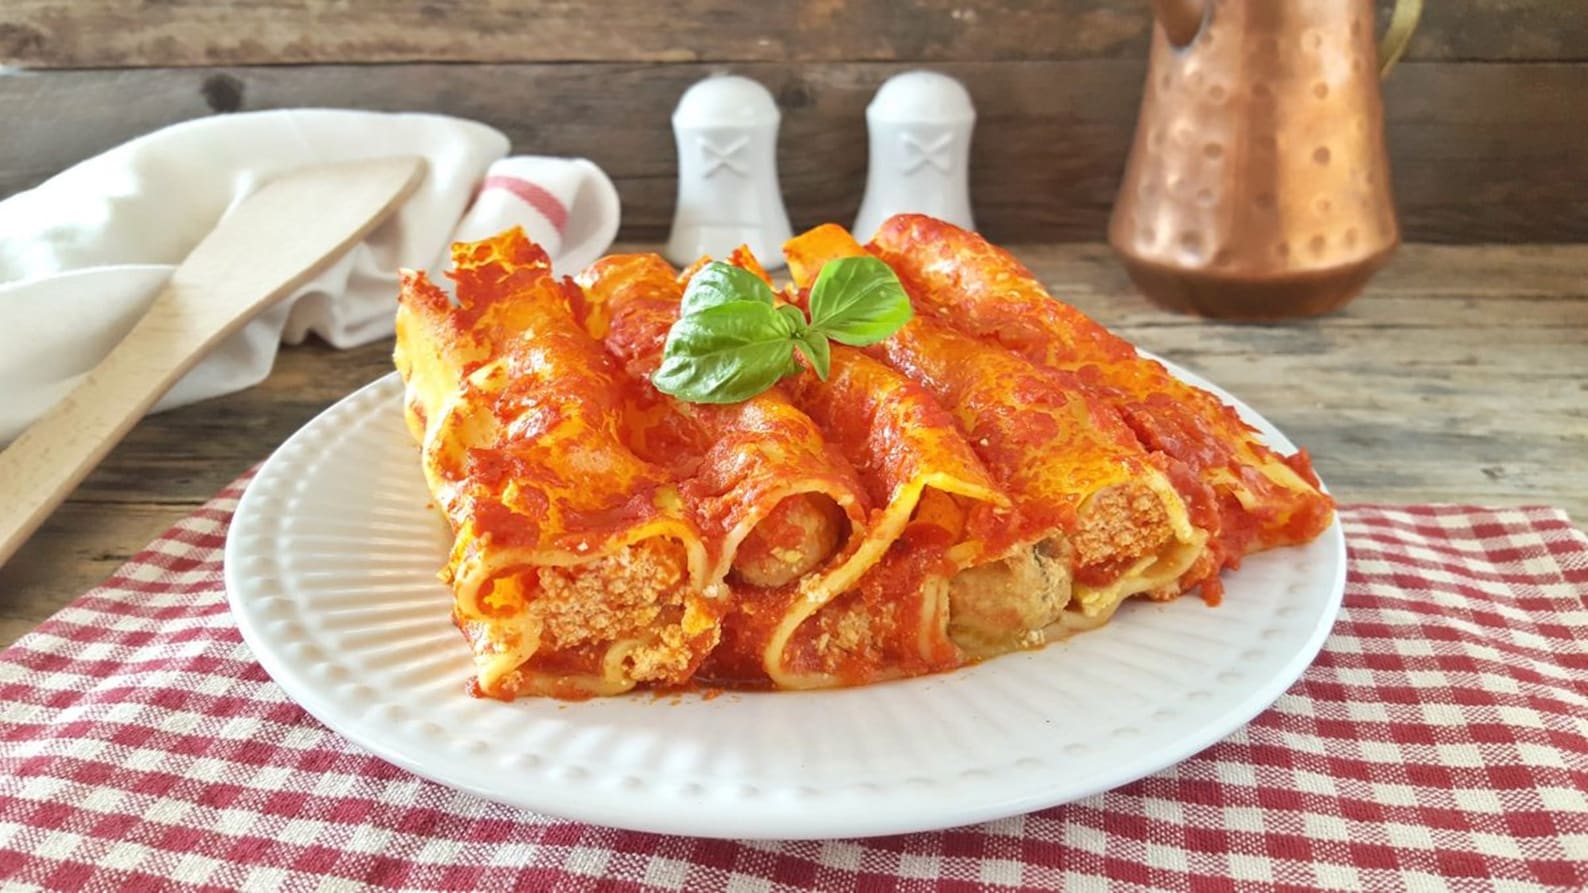 Cannelloni Recipe Download Printable Filled Pasta Tubes - Etsy UK